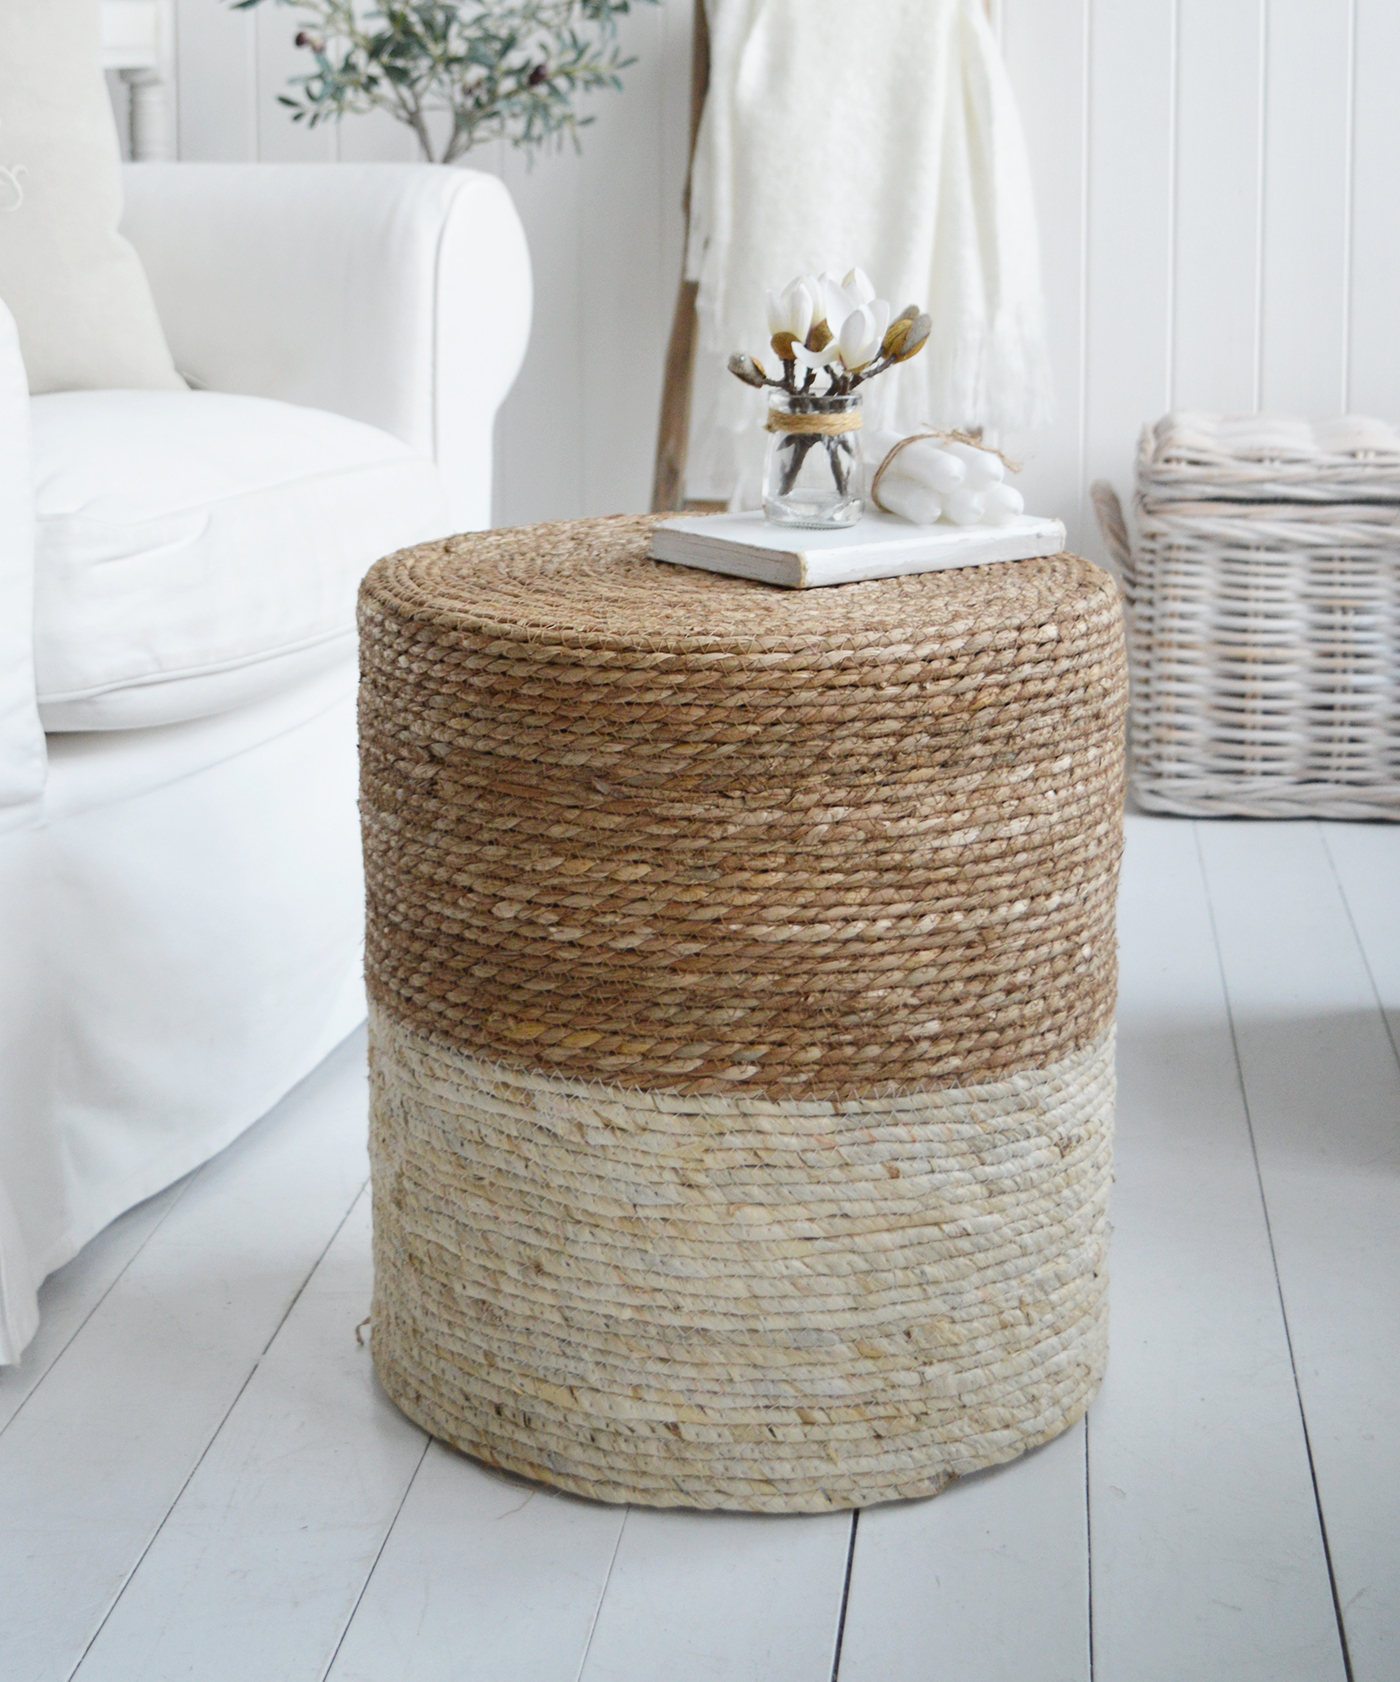 Fall River Stool, Seat or side table - Coastal and Modern Country New England Living Room Furniture